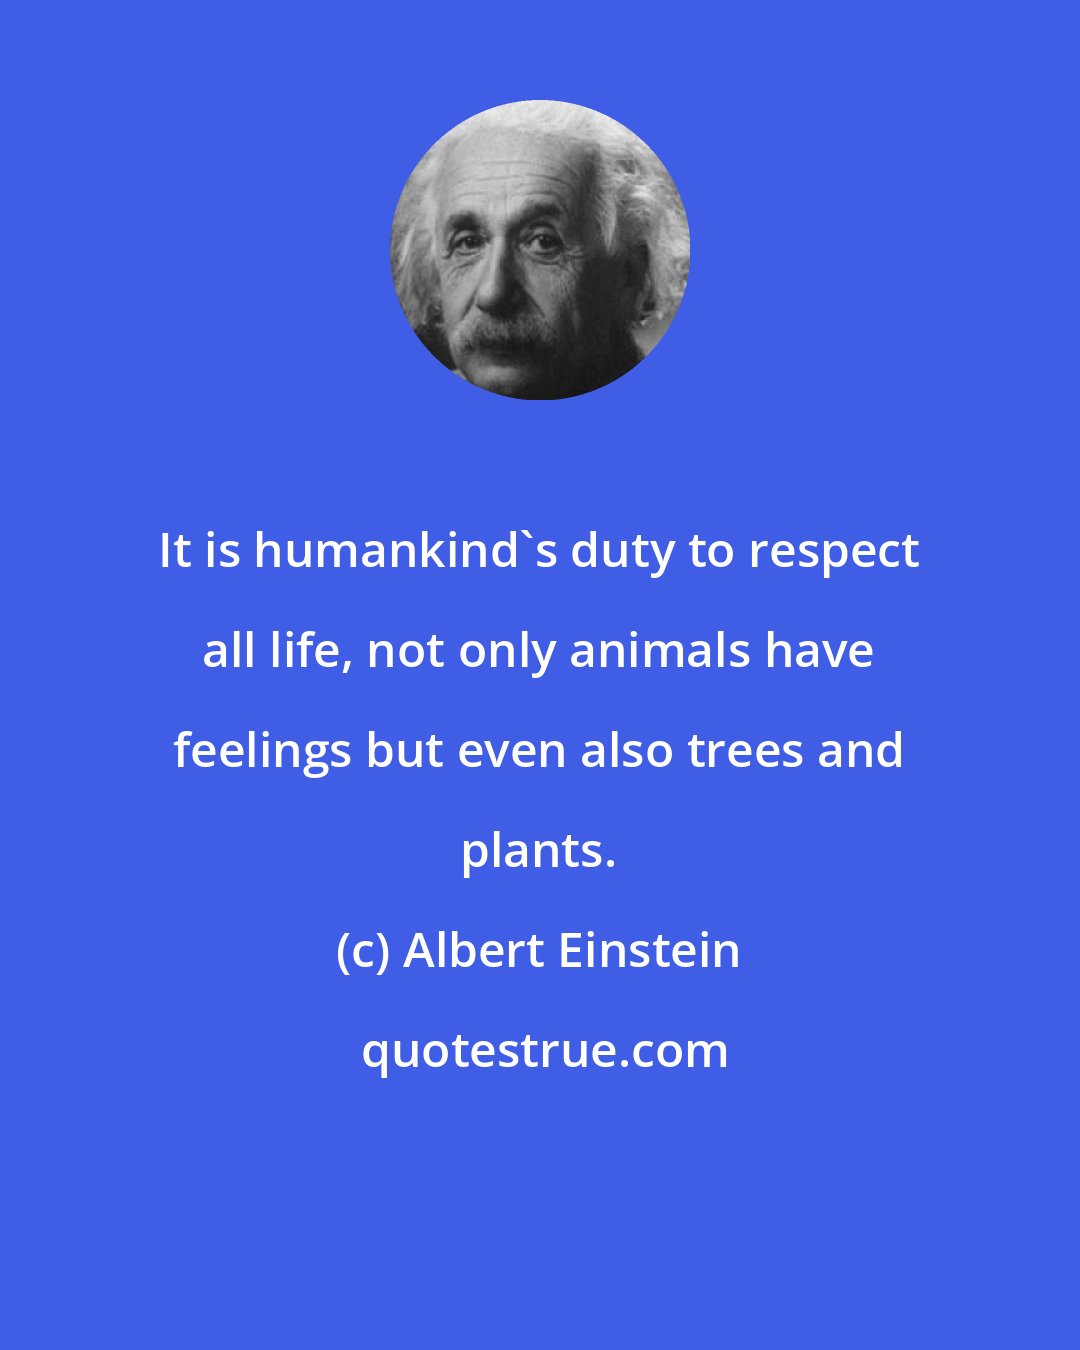 Albert Einstein: It is humankind's duty to respect all life, not only animals have feelings but even also trees and plants.